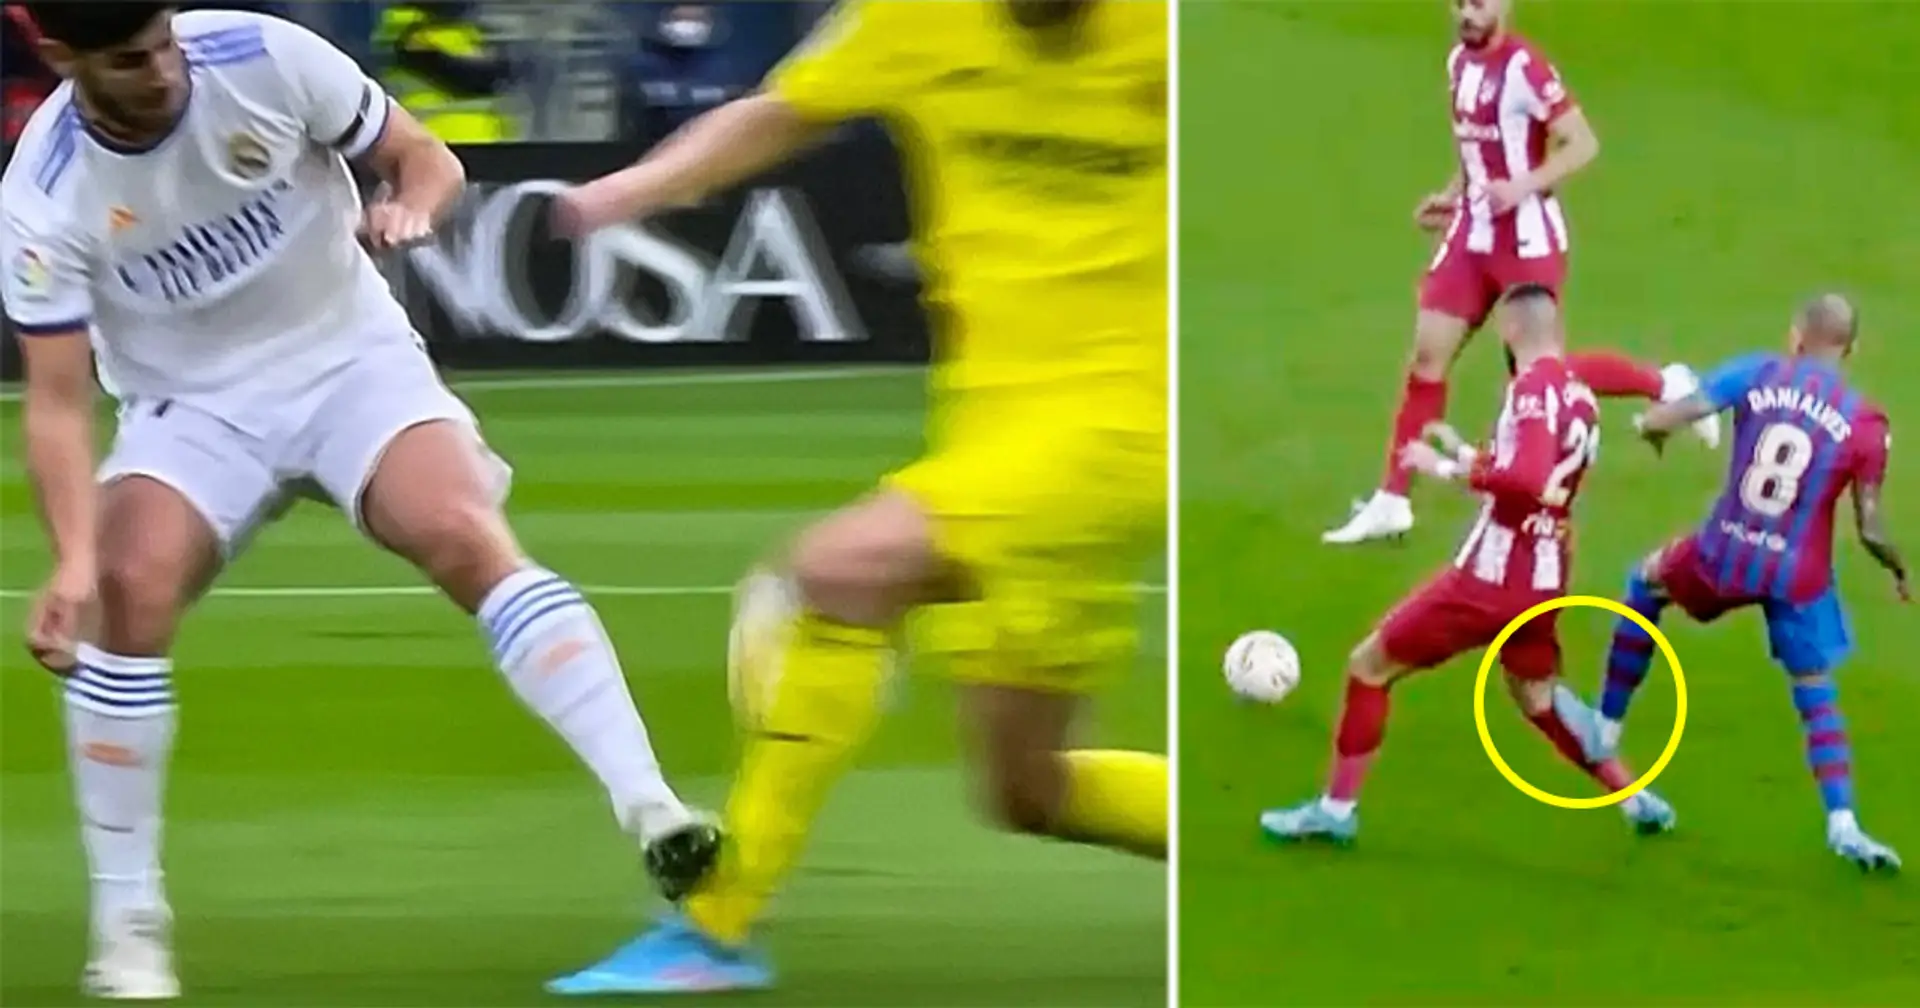 Asensio commits same foul as Dani Alves in Atletico clash, gets no red card